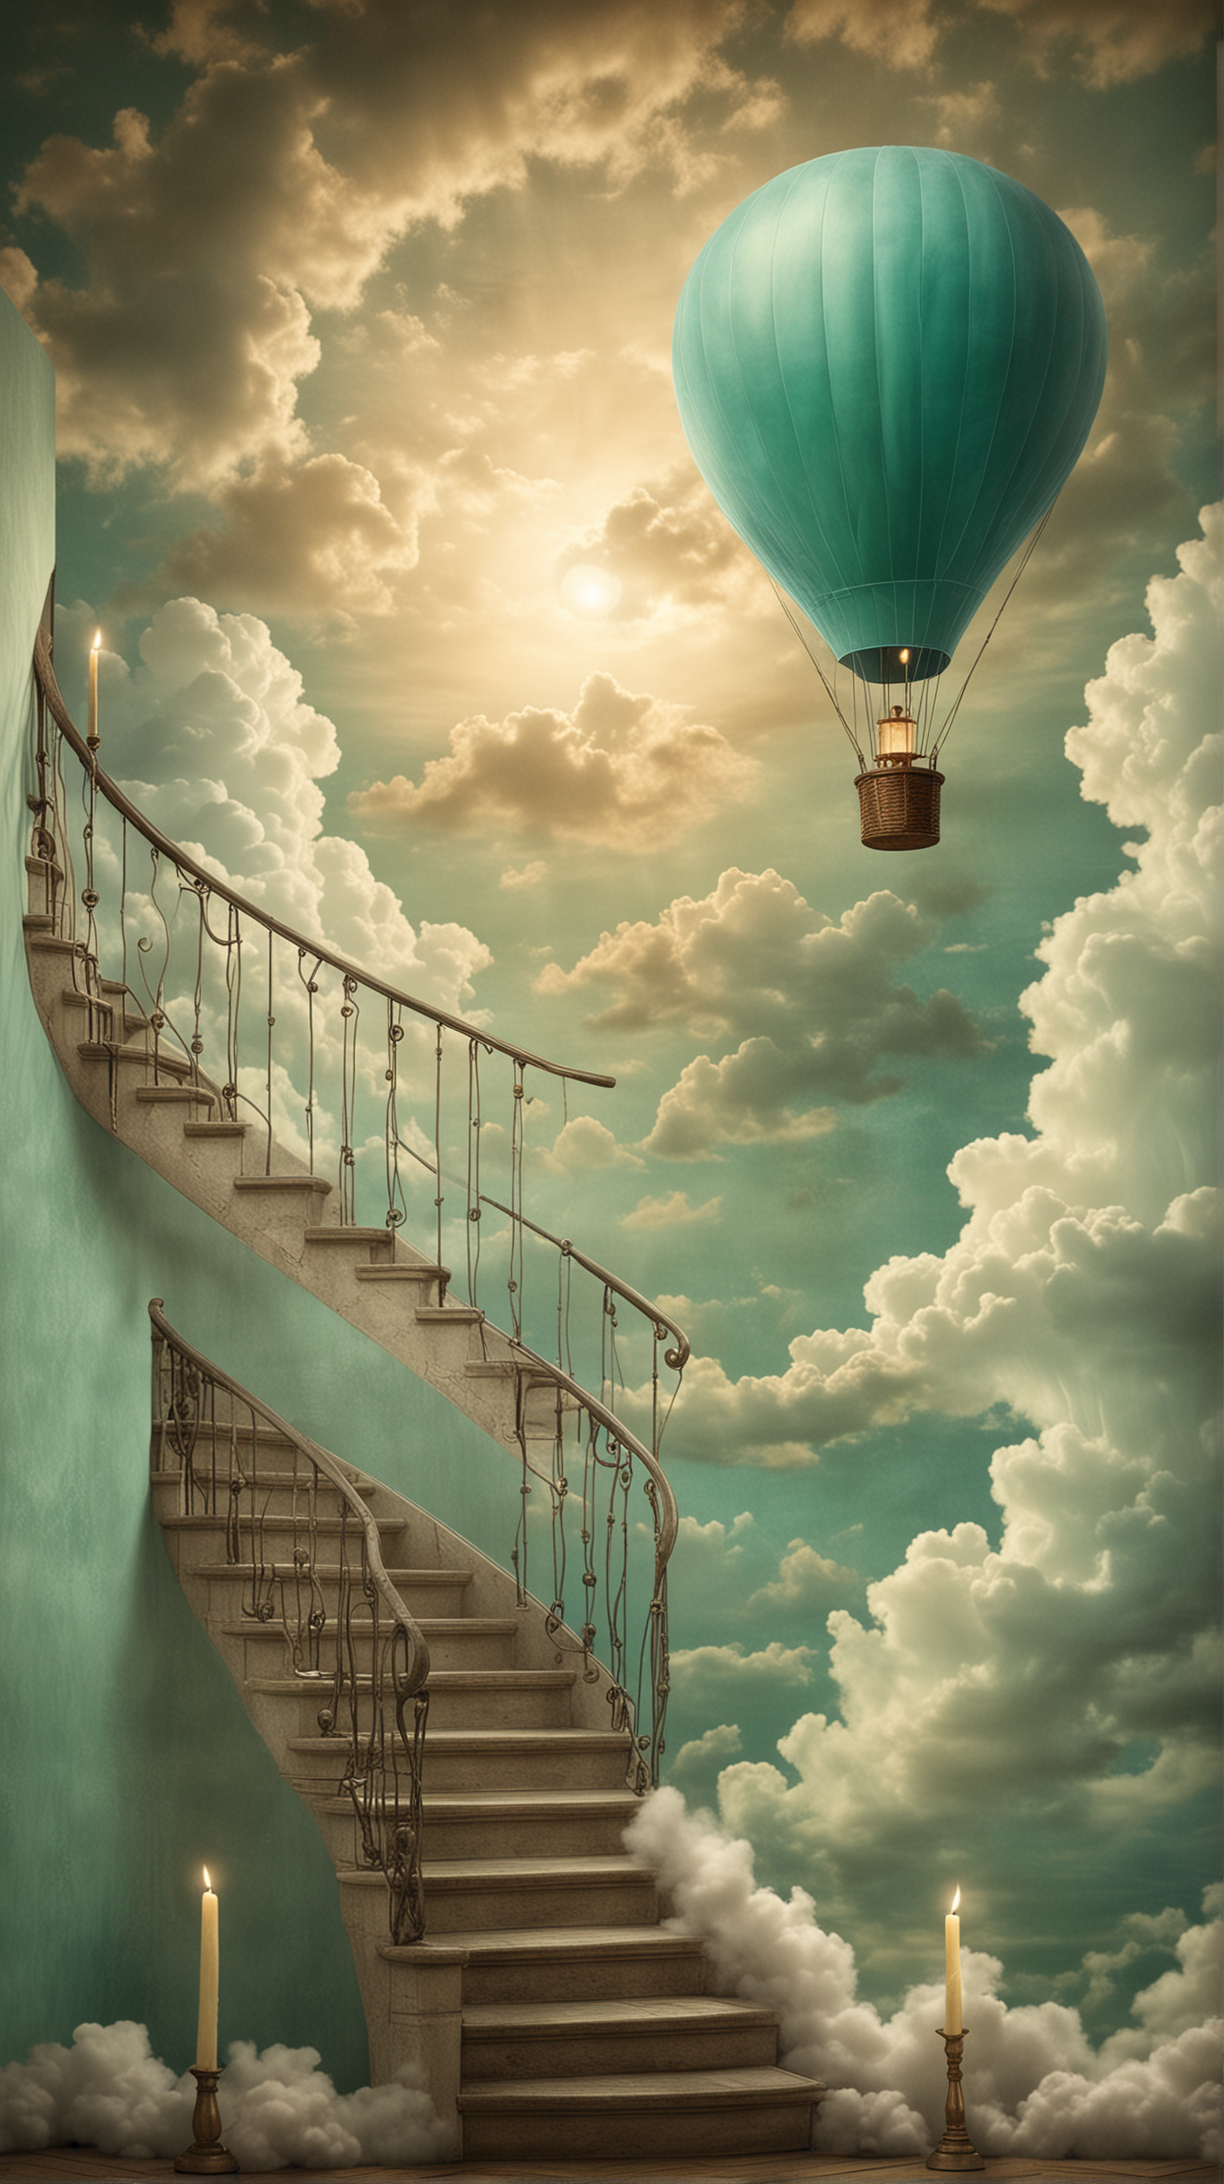 Surreal Staircase Illuminated by Candlelight with Turquoise Hot Air Balloon and Dreamy Clouds